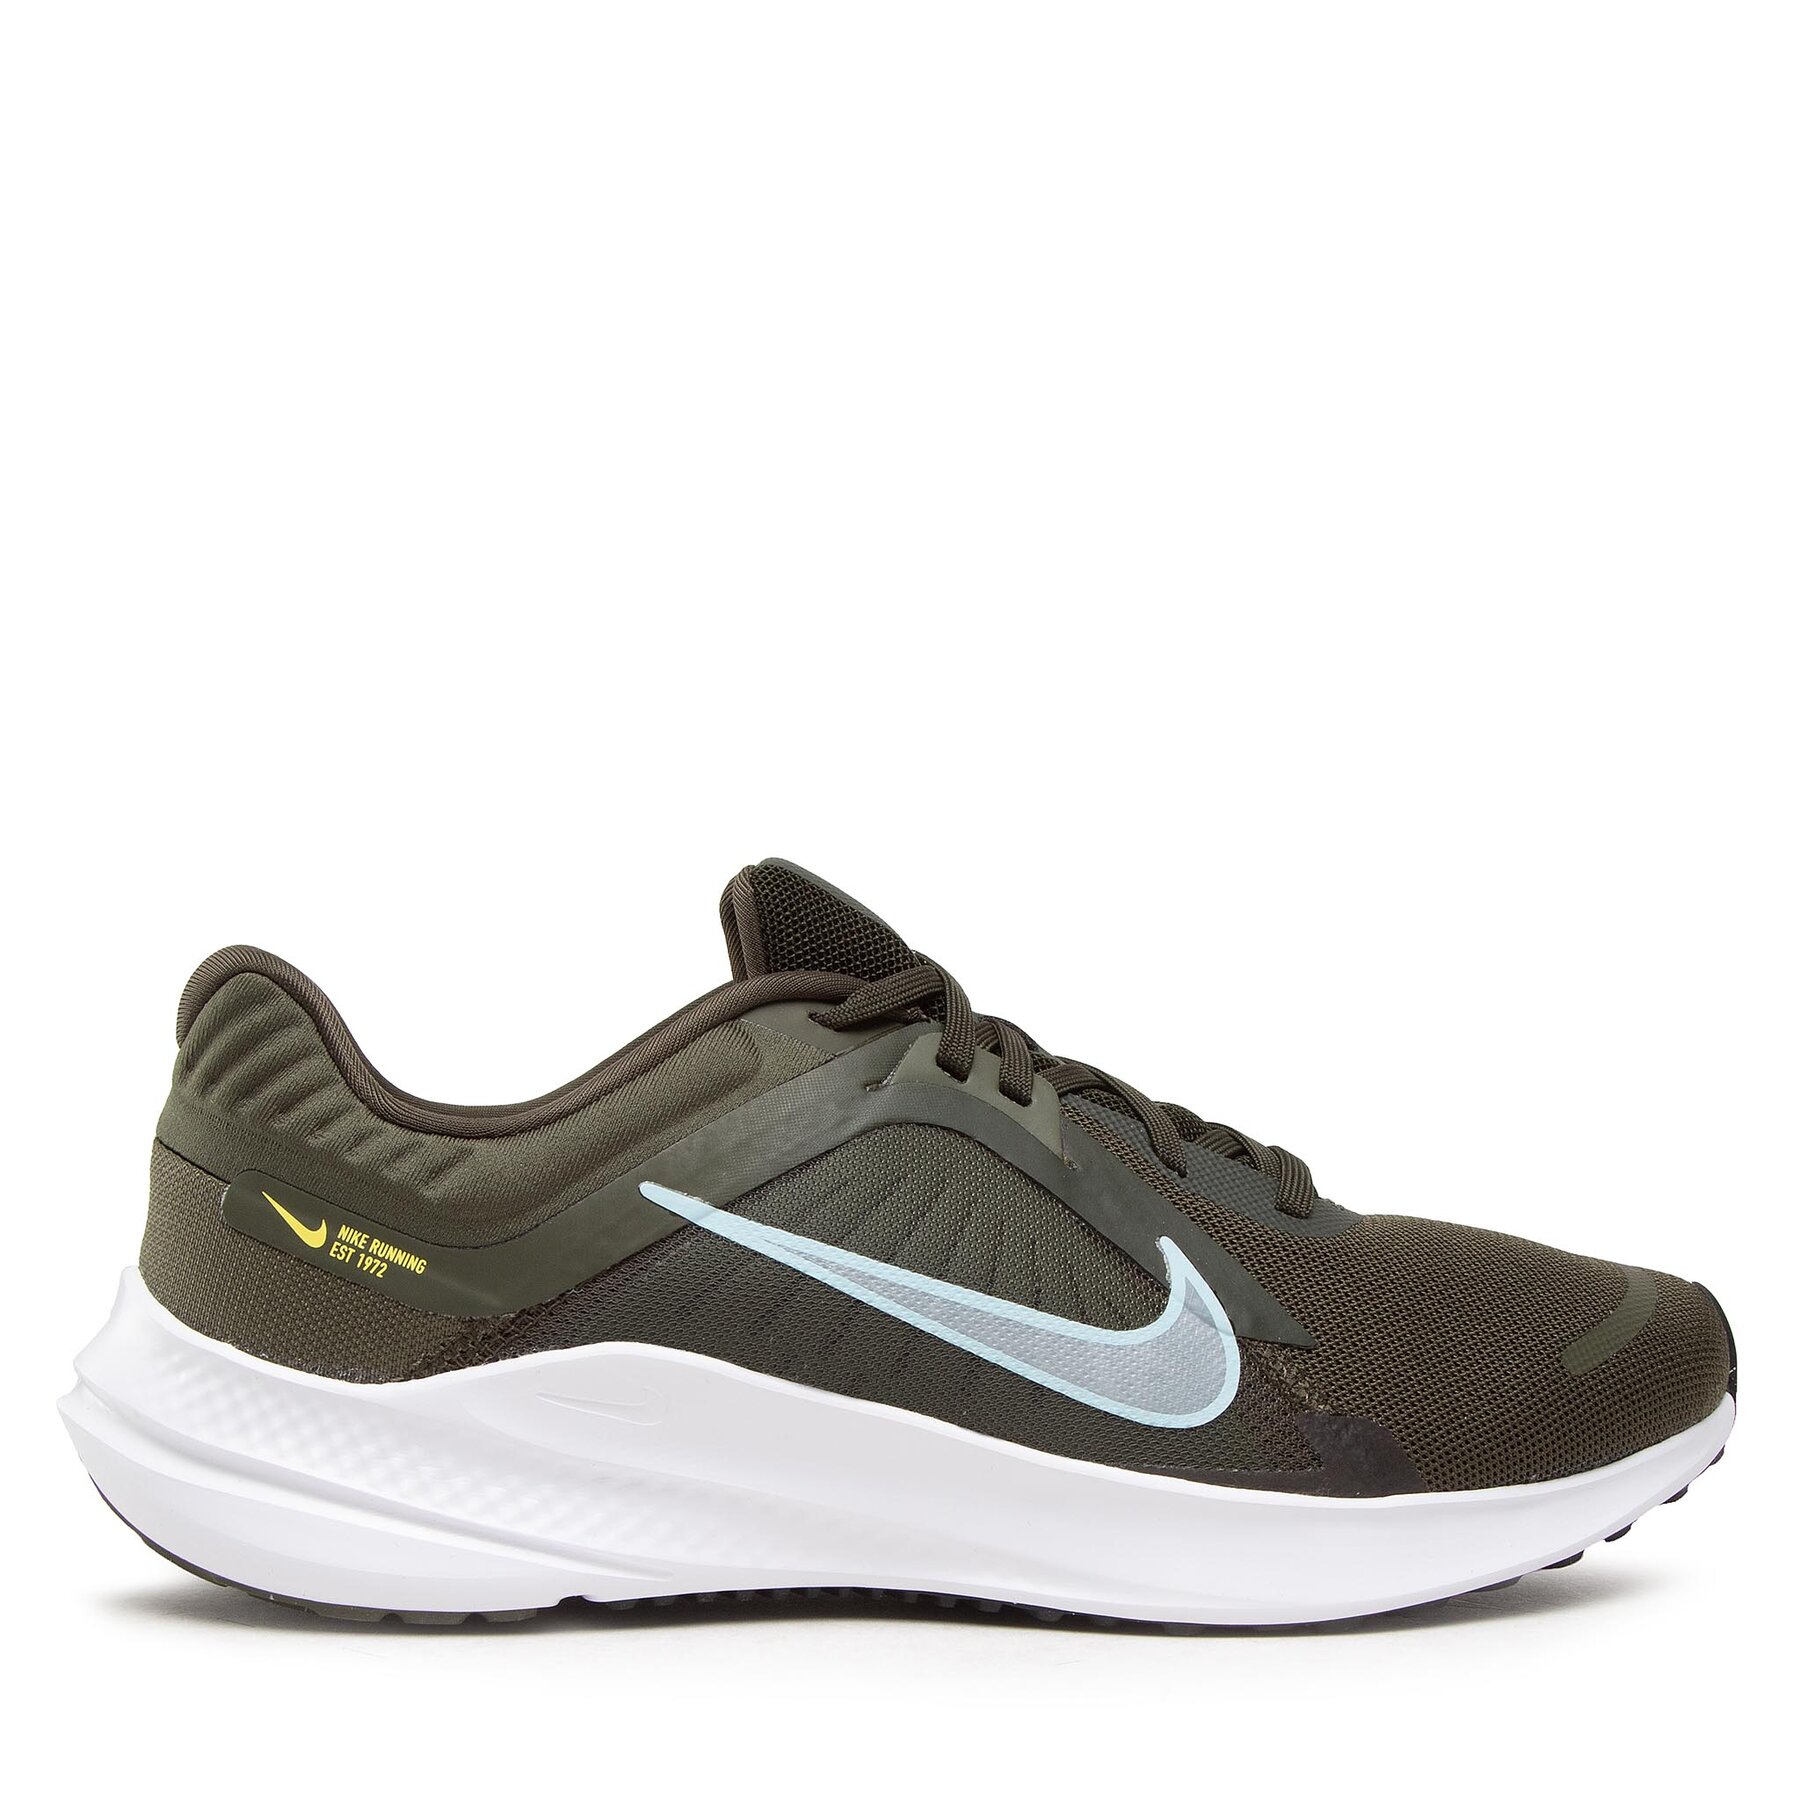 NIKE QUEST 5 - Zapatos